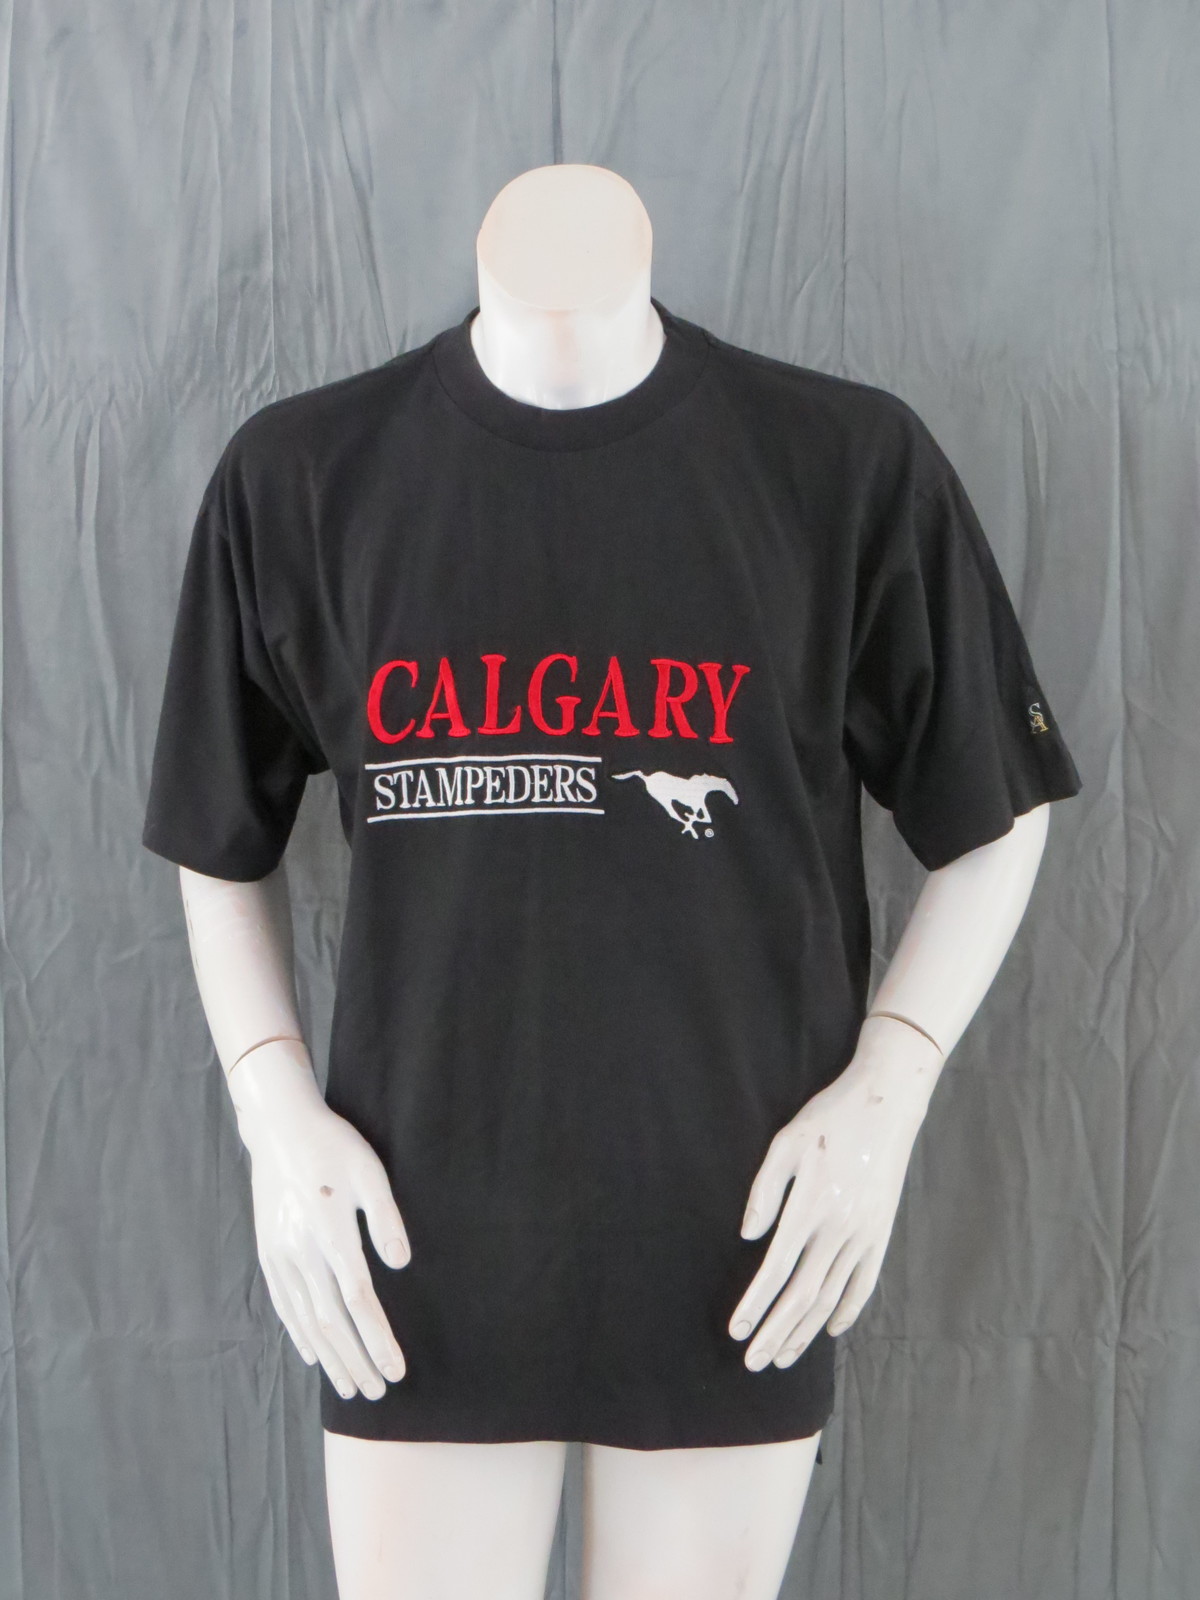 Calgary Stampeders Shirt (VTG) - By Soft Wear - Stitched Graphics - Men's Large - $49.00